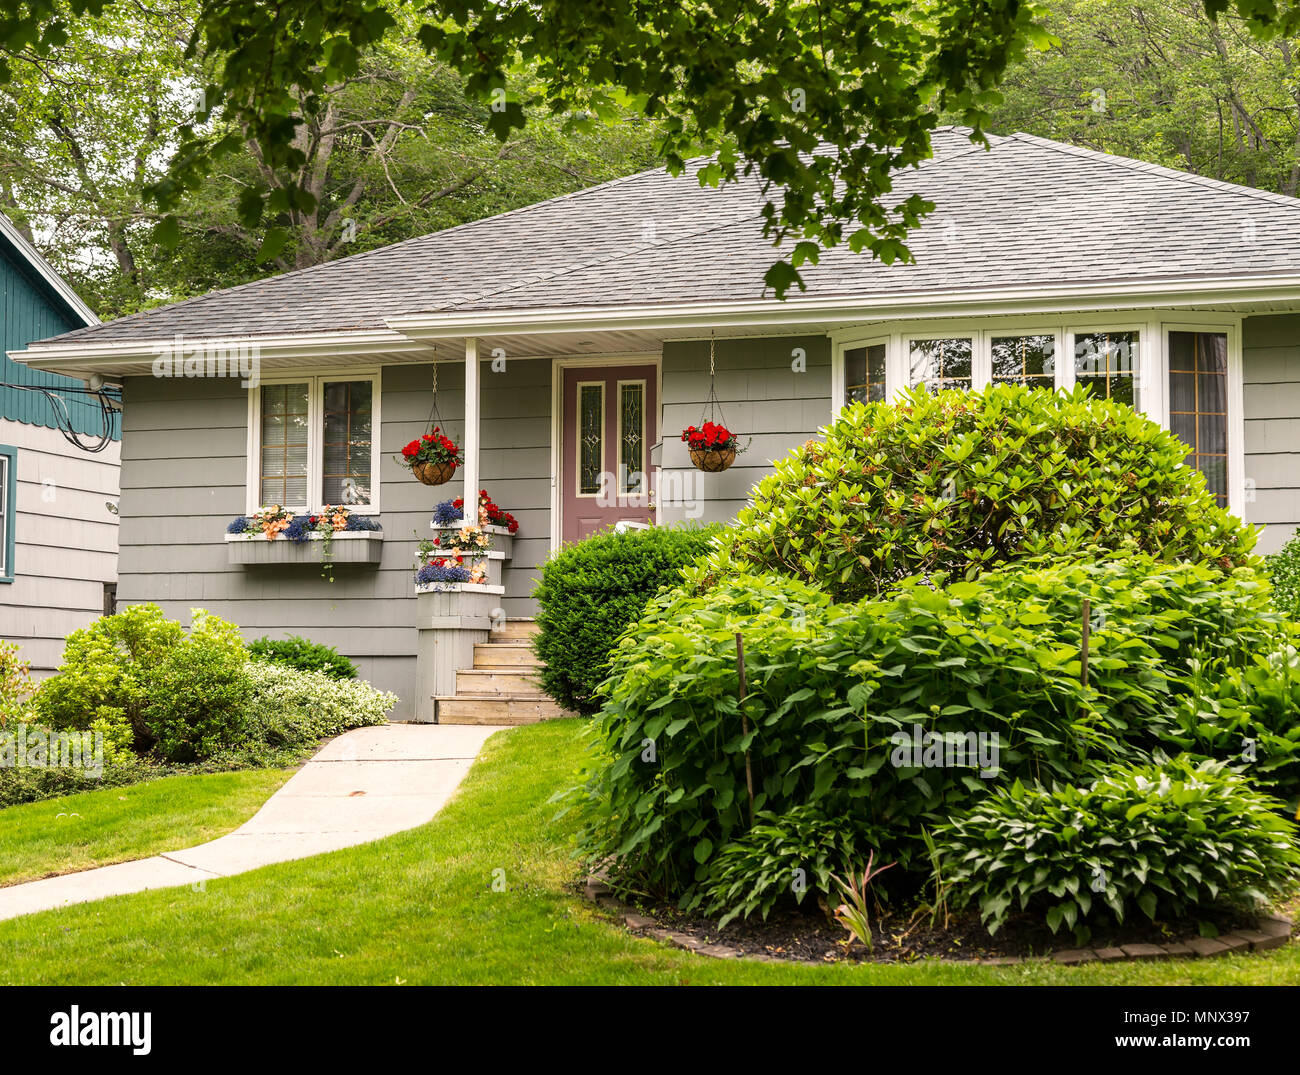 Old style bungalow from the 60s or 70s. Stock Photo